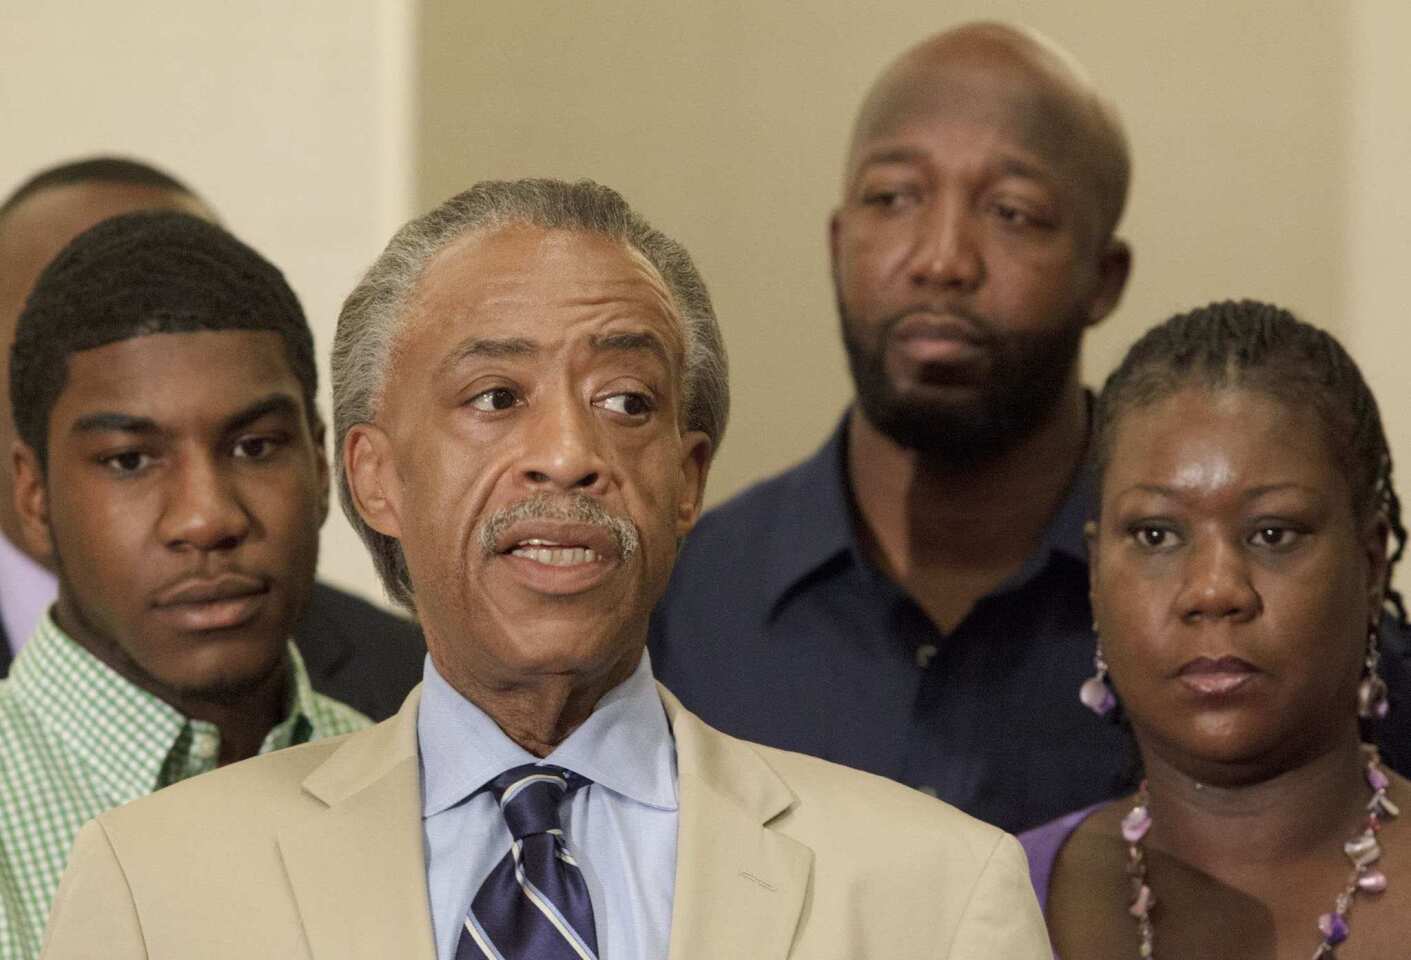 The Rev. Al Sharpton, with Trayvon Martin's parents, Tracy Martin and Sybrina Fulton, speaks out against the judge's decision to allow bail. Fulton said she was disappointed.